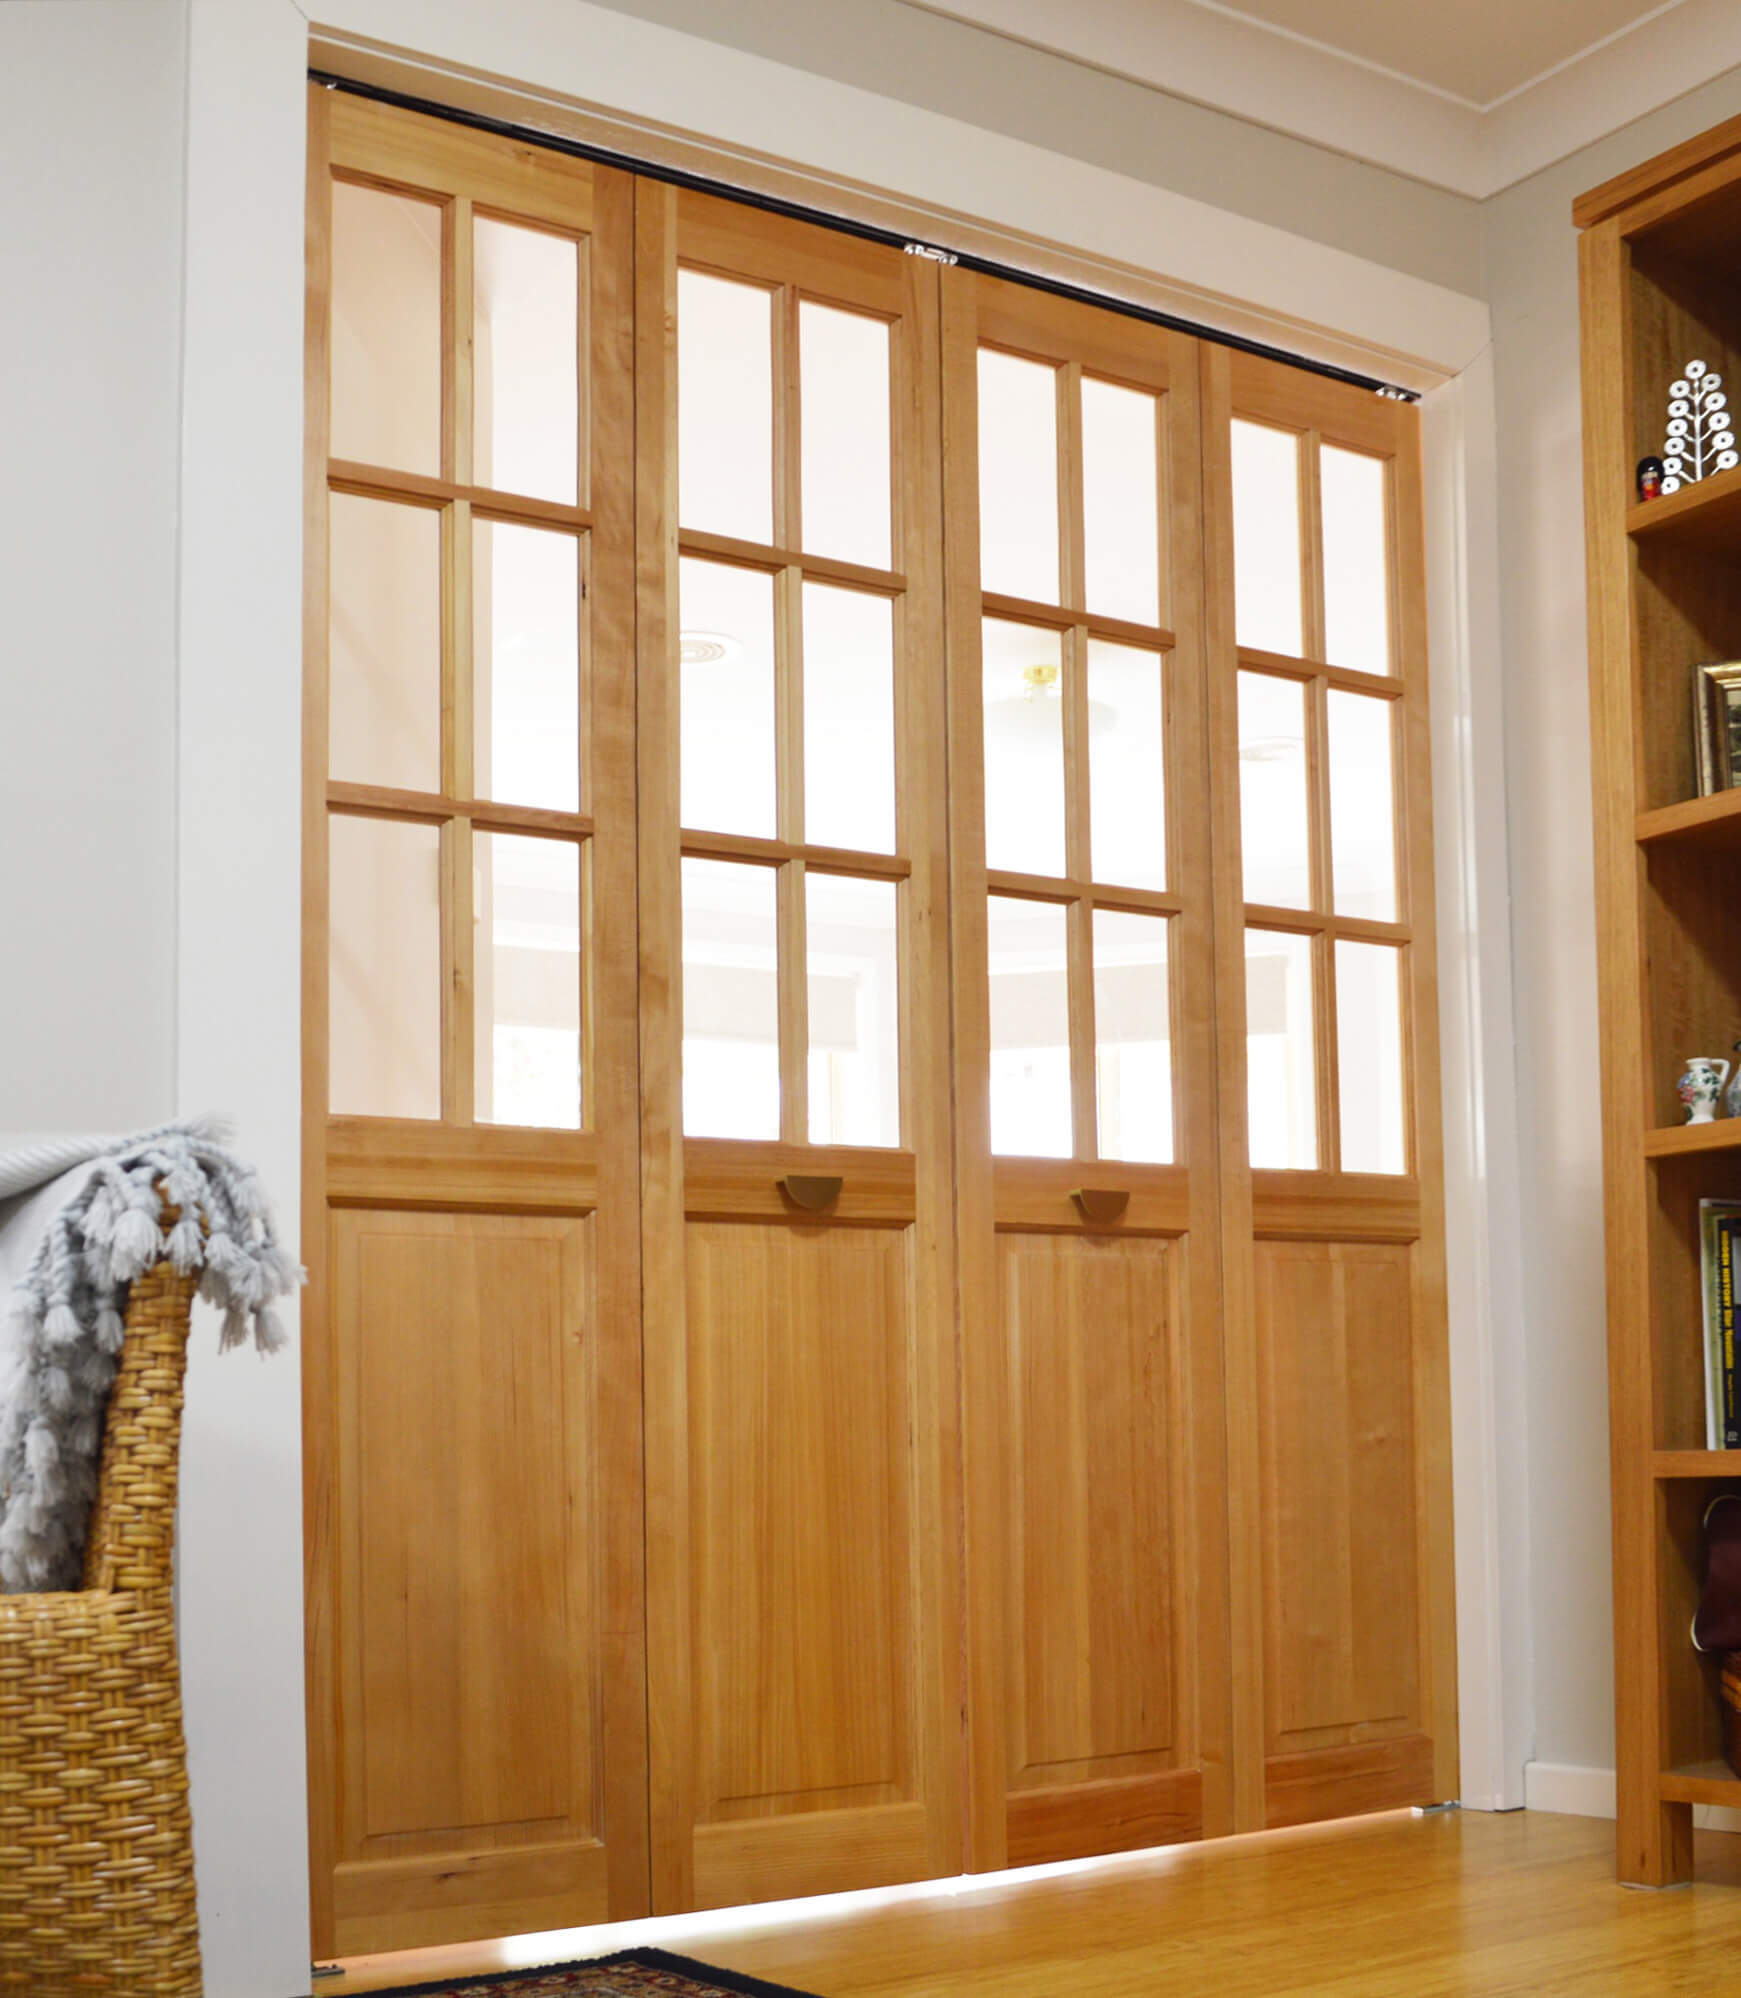 Doors Plus - 4 Panel Internal Bifolds Featuring Clear Glass in Light Maple Finish